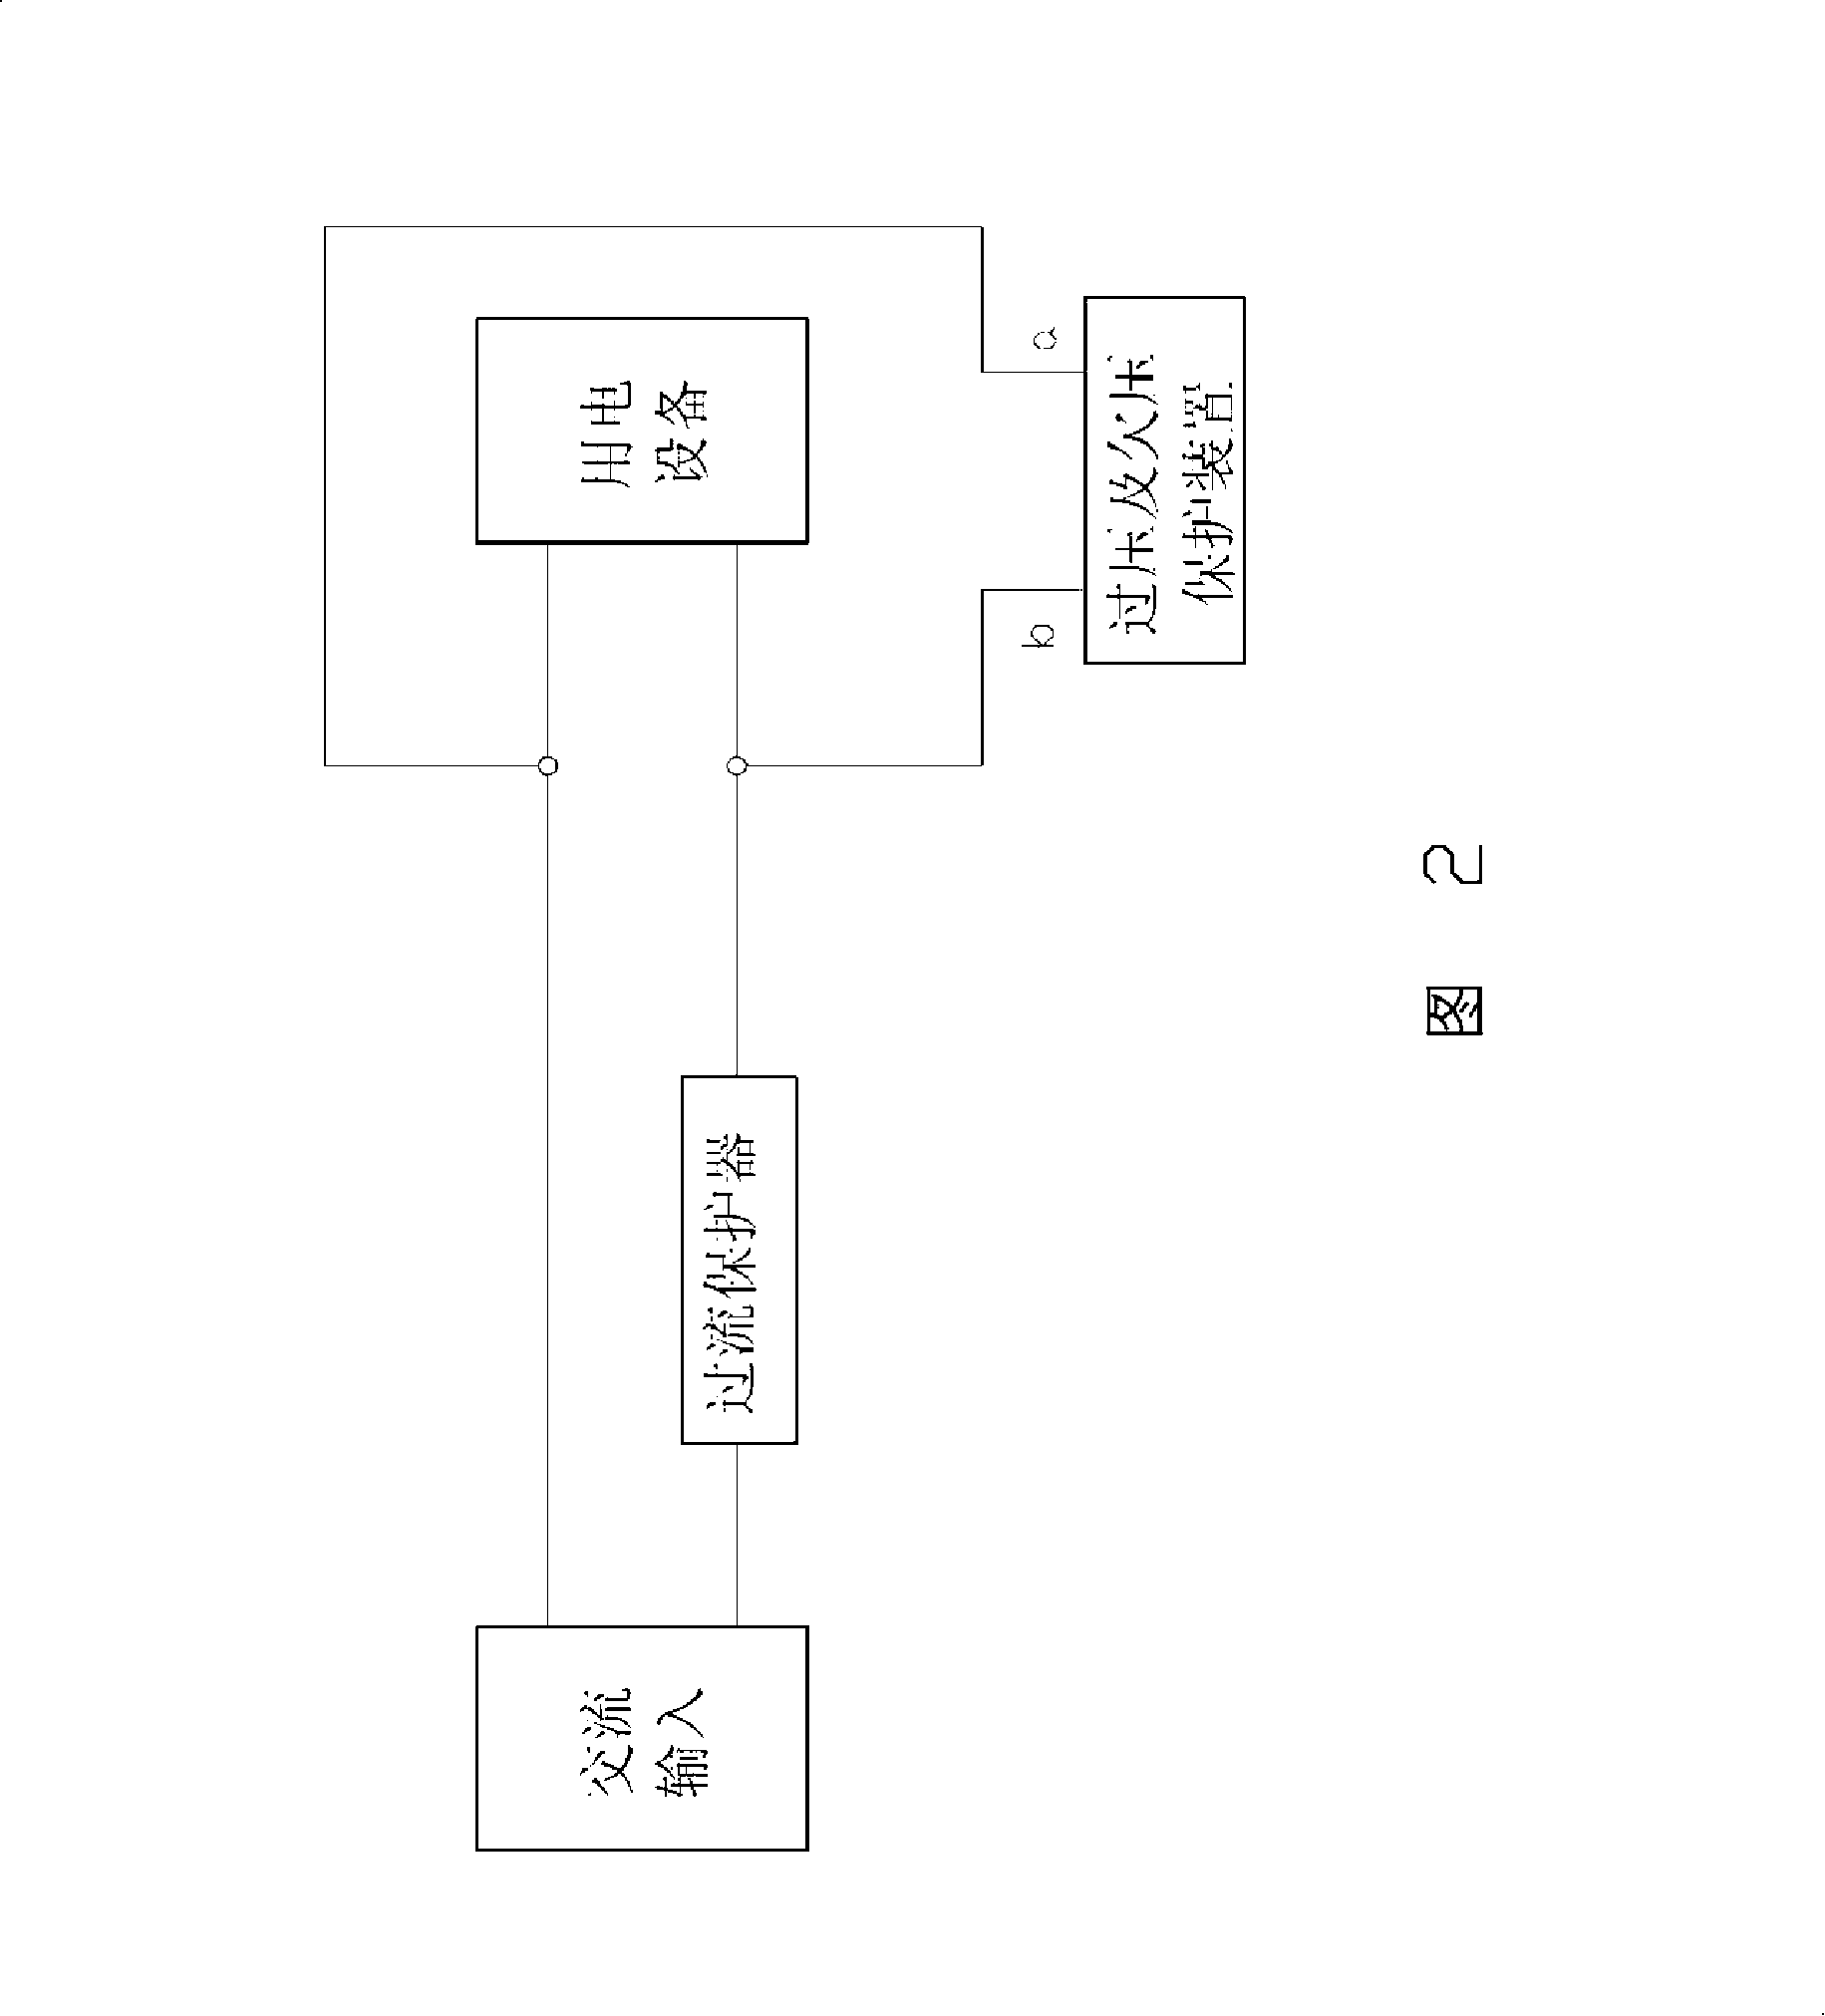 Over voltage and under-voltage device